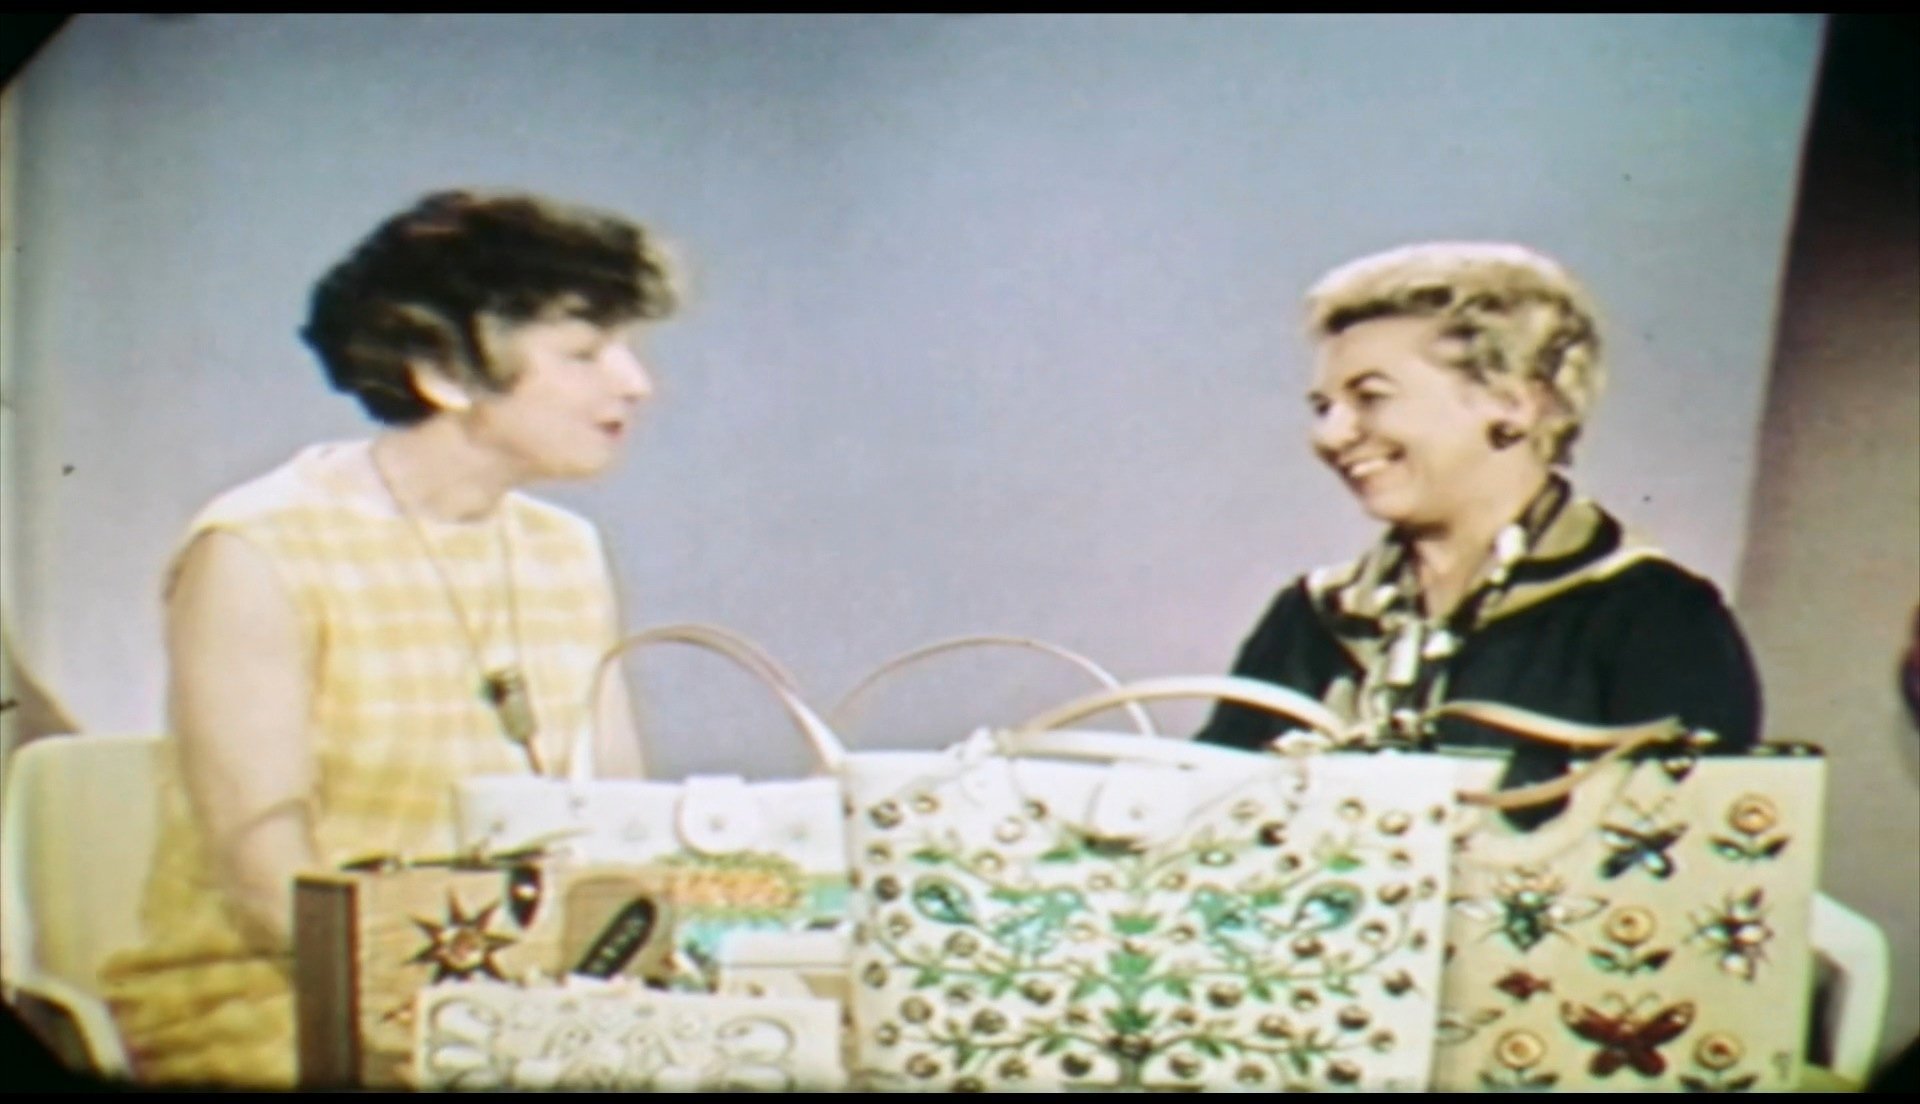  Archival footage shows Enid making an appearance on a local Seattle talk show in the 1960s. Credit: Michael Maloy, 2022 